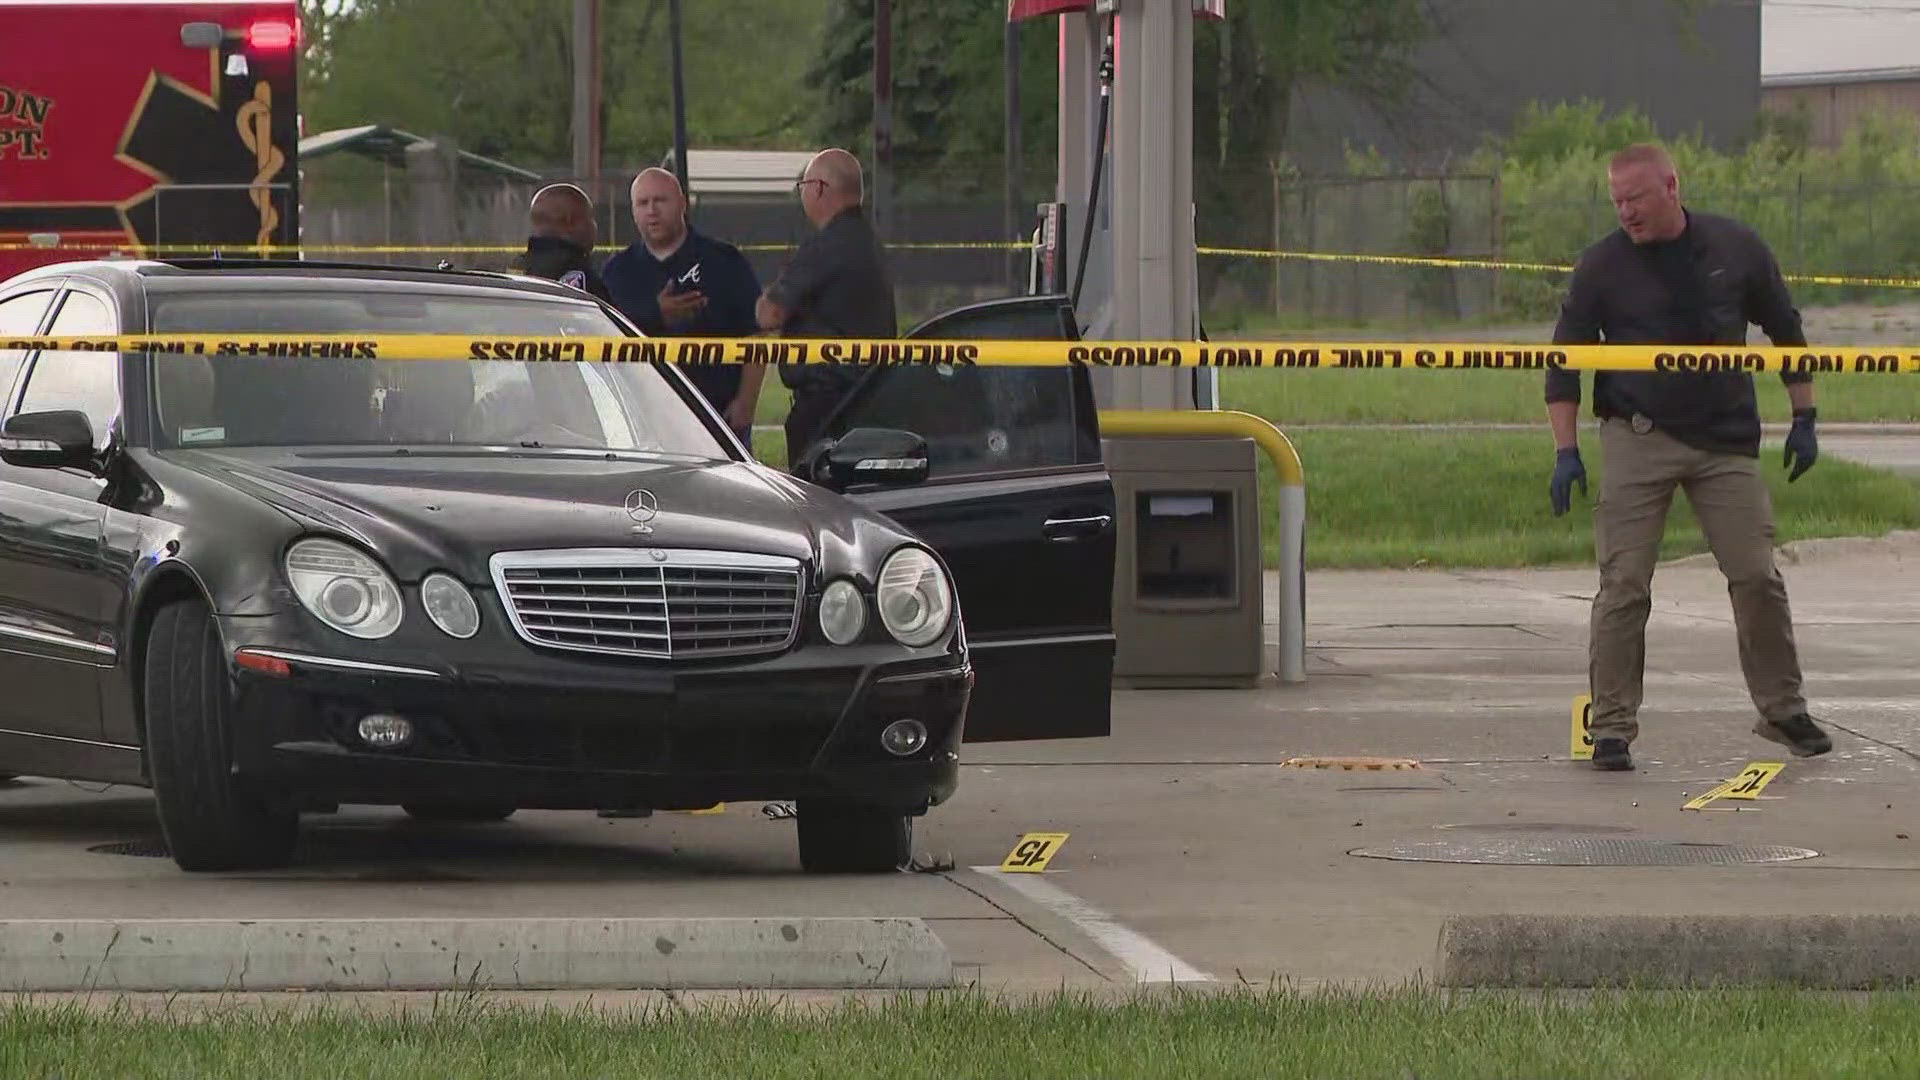 A man who was wanted in a separate investigation shot himself after an exchange of gunfire with a police officer at an Anderson gas station May 7.